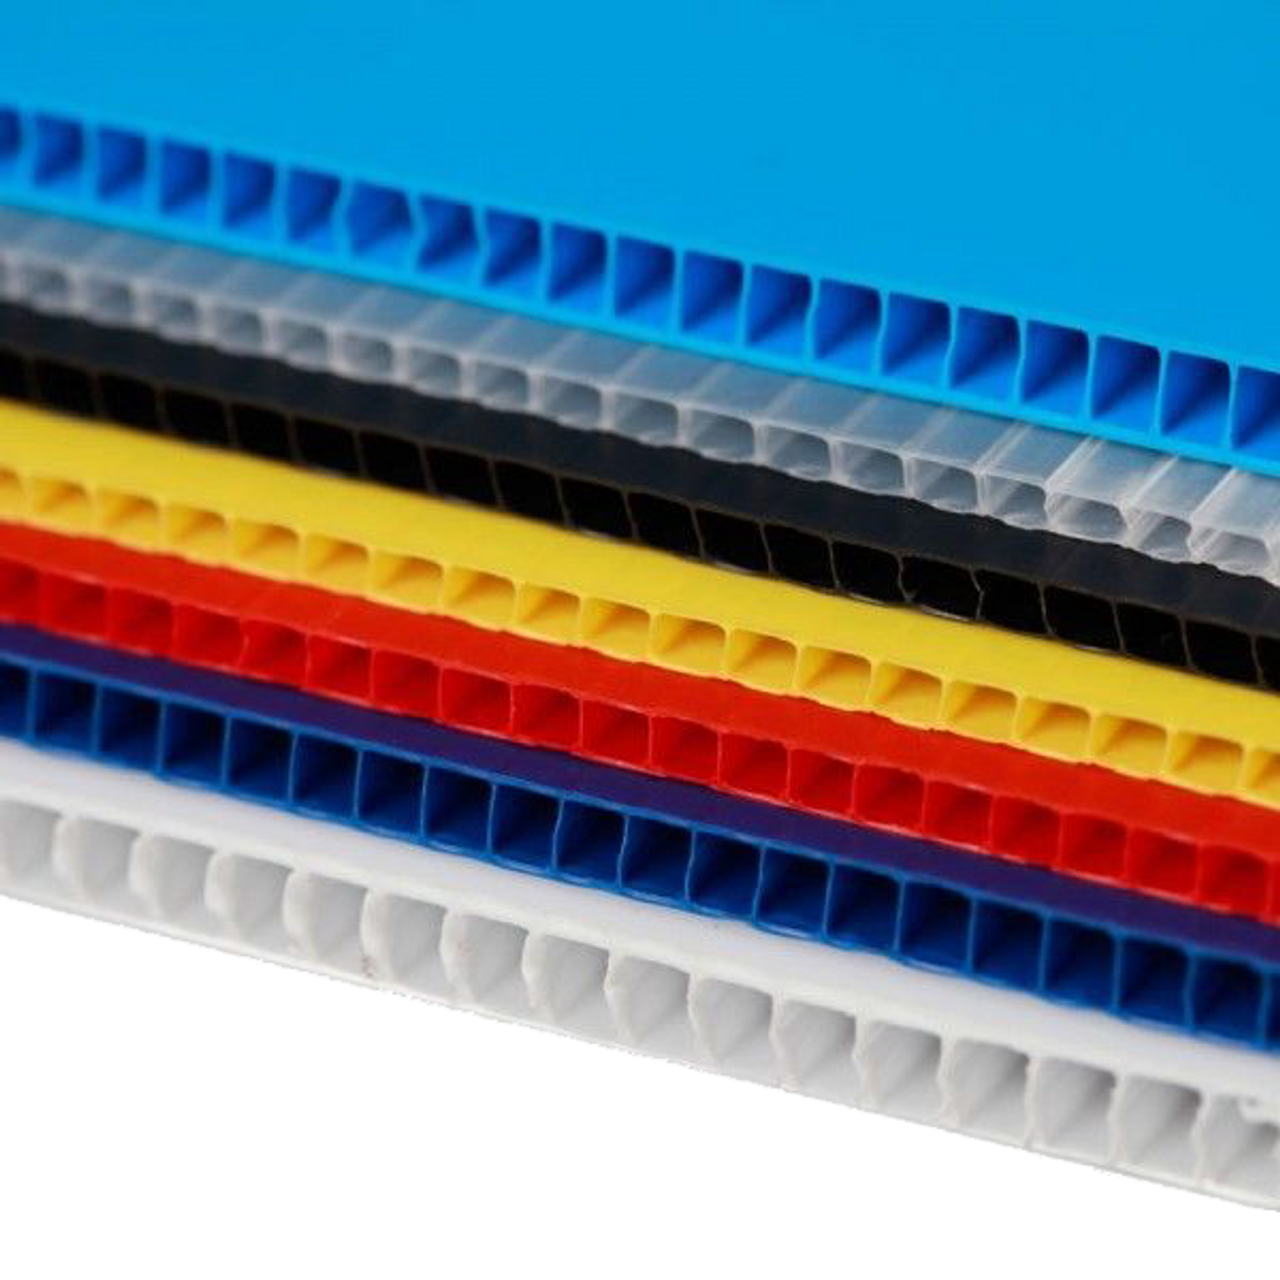 4mm Corrugated plastic sheets: 24 X 36 :10 Pack 100% Virgin Neon Blue